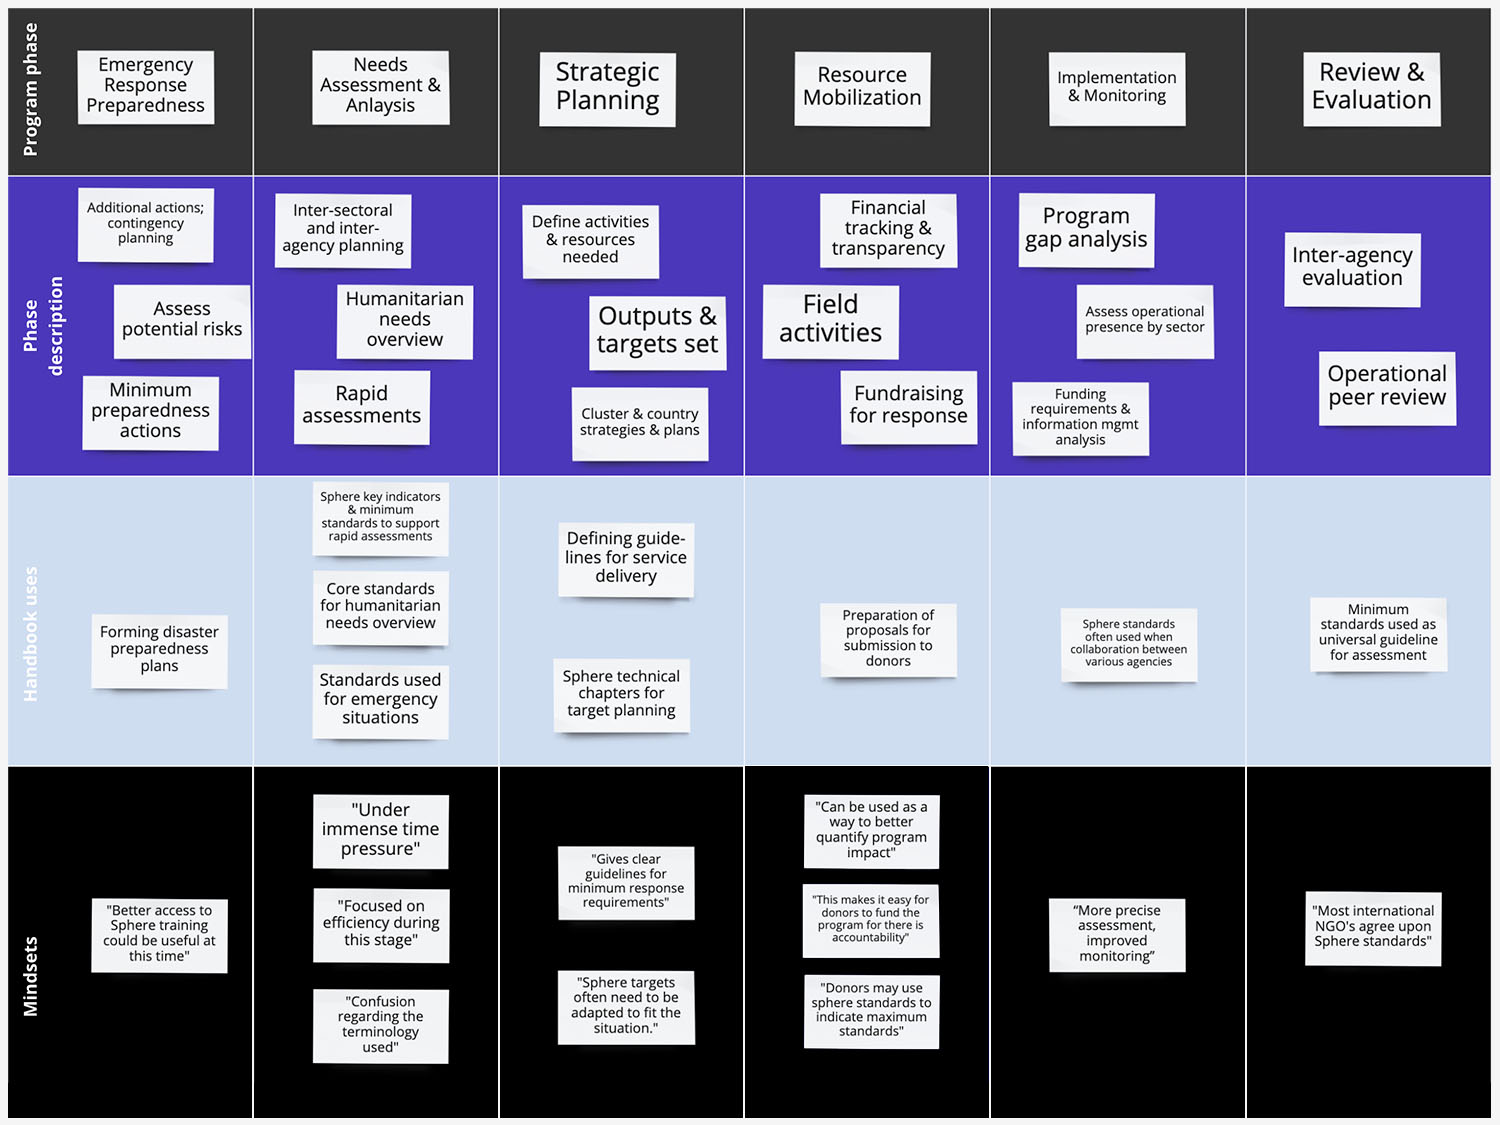 Journey map depicting how Sphere handbook users use the book throughout the humanitarian program phases.